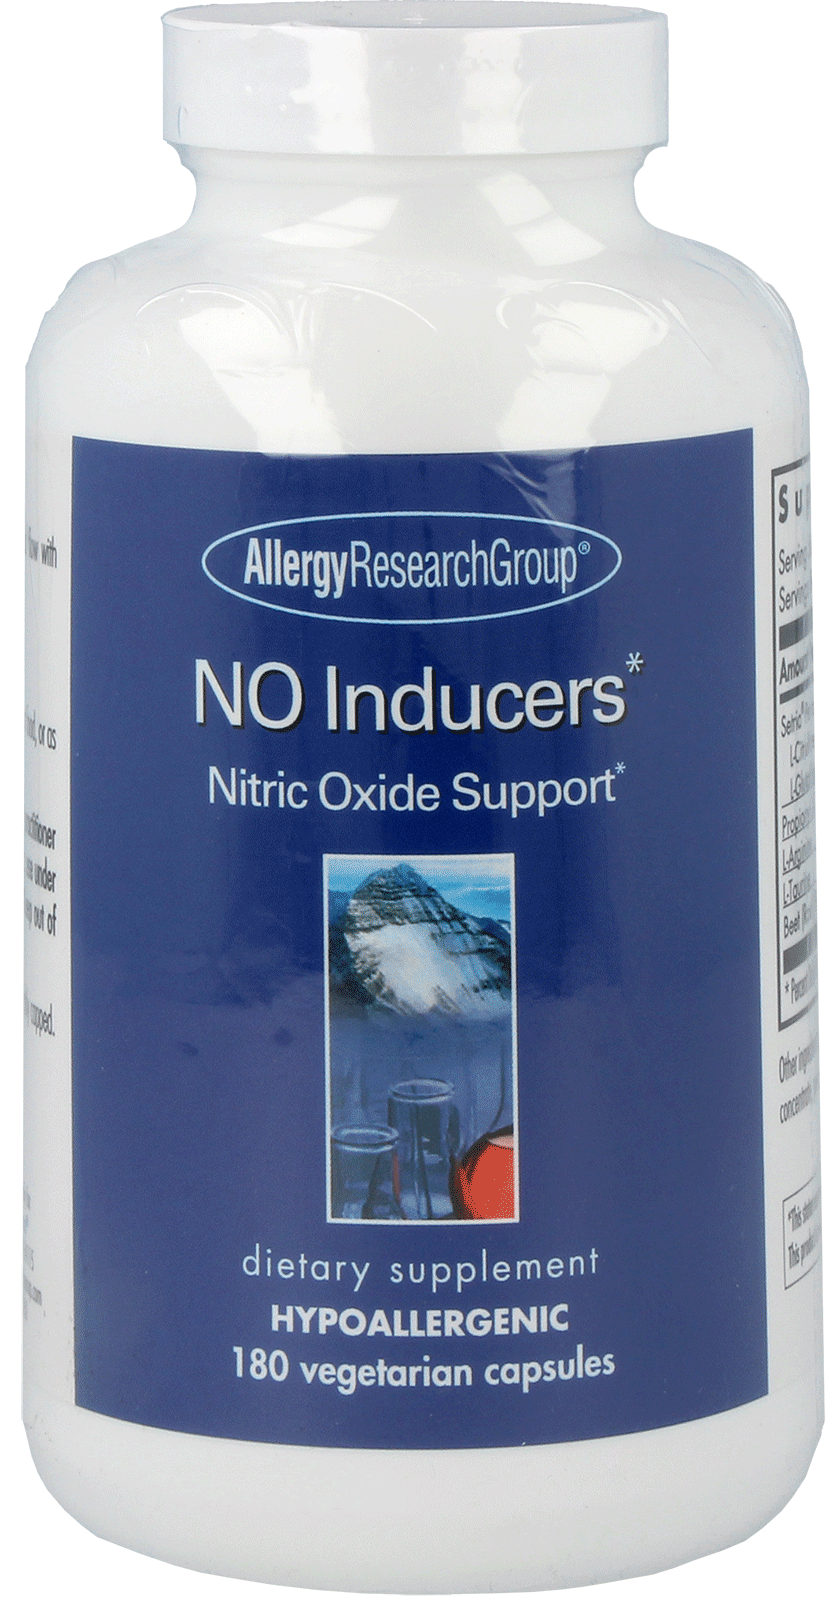 NO Inducers*